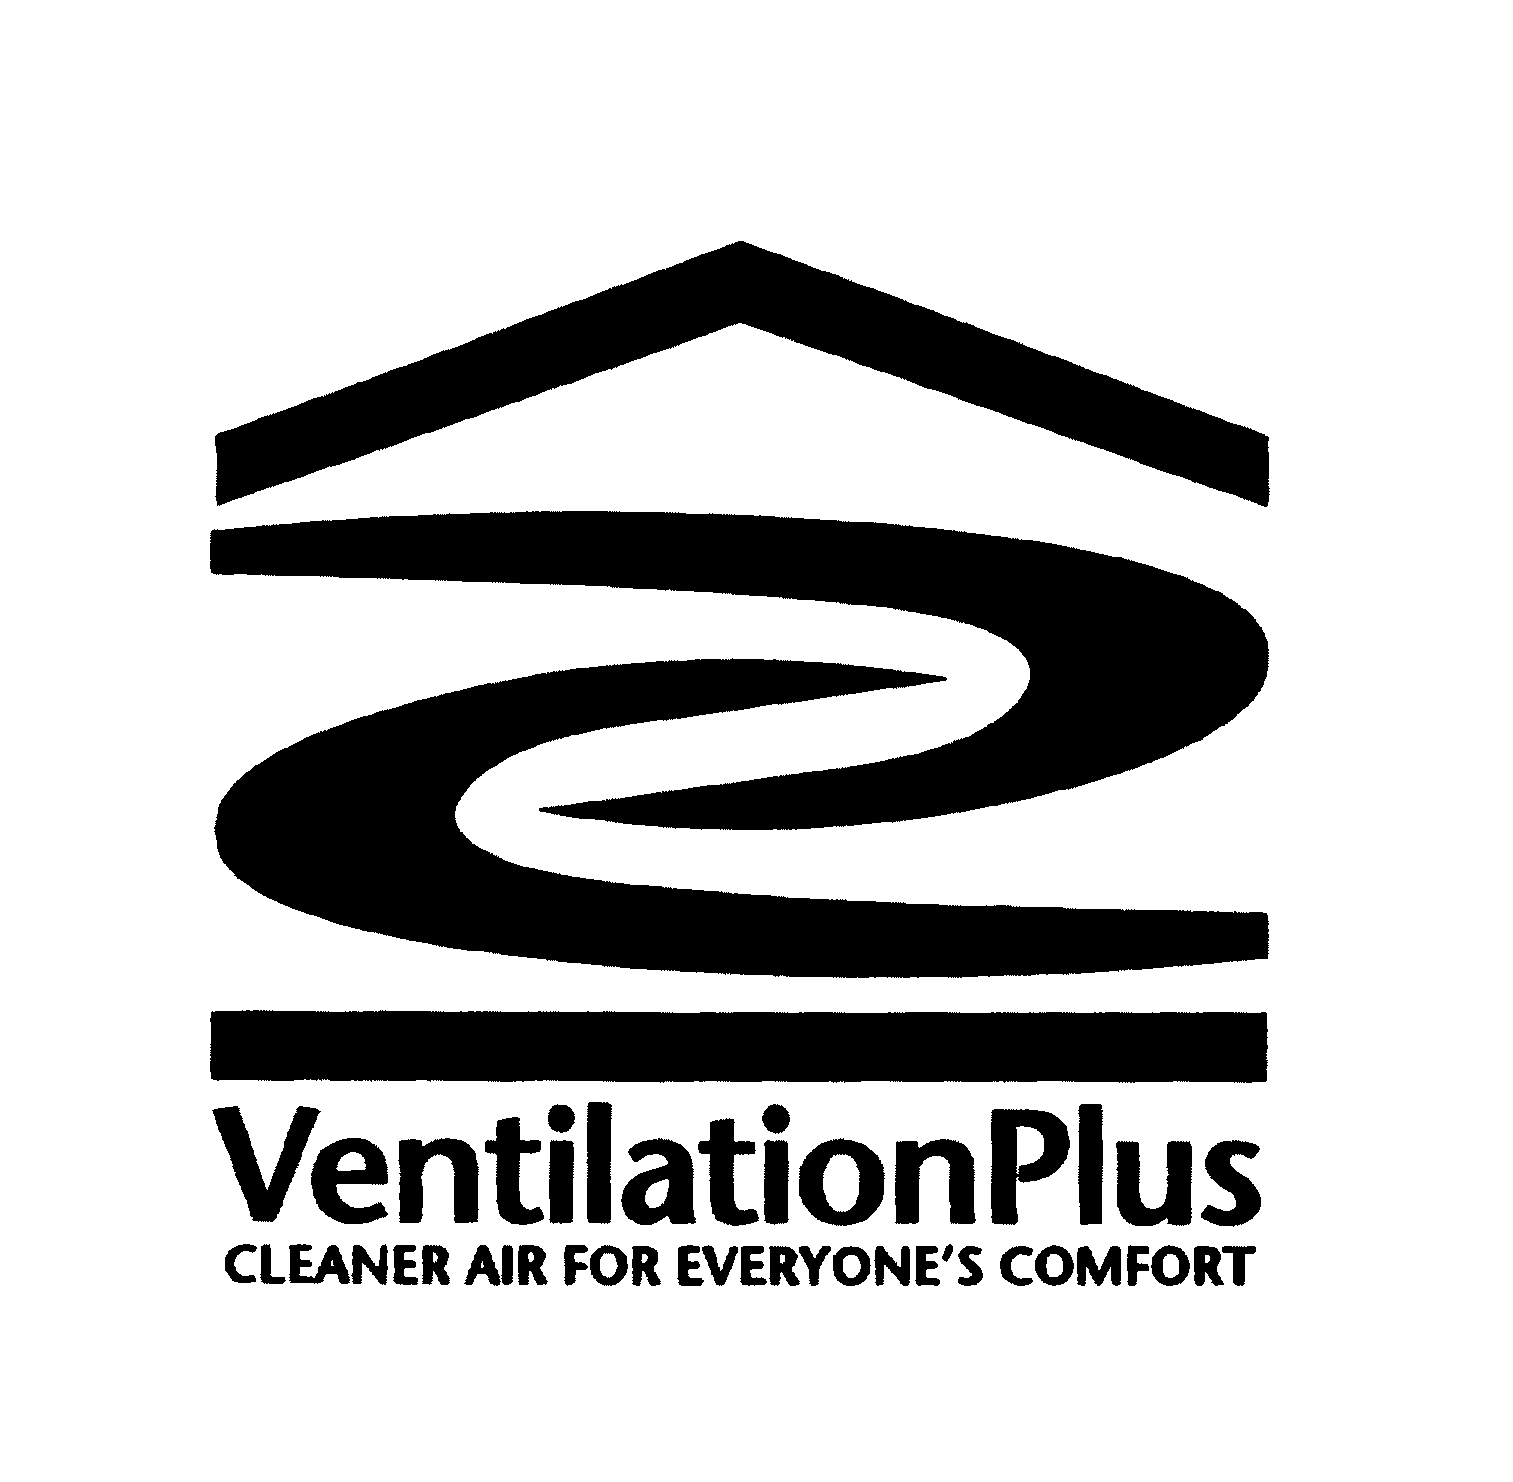  VENTILATION PLUS CLEANER AIR FOR EVERYONE'S COMFORT